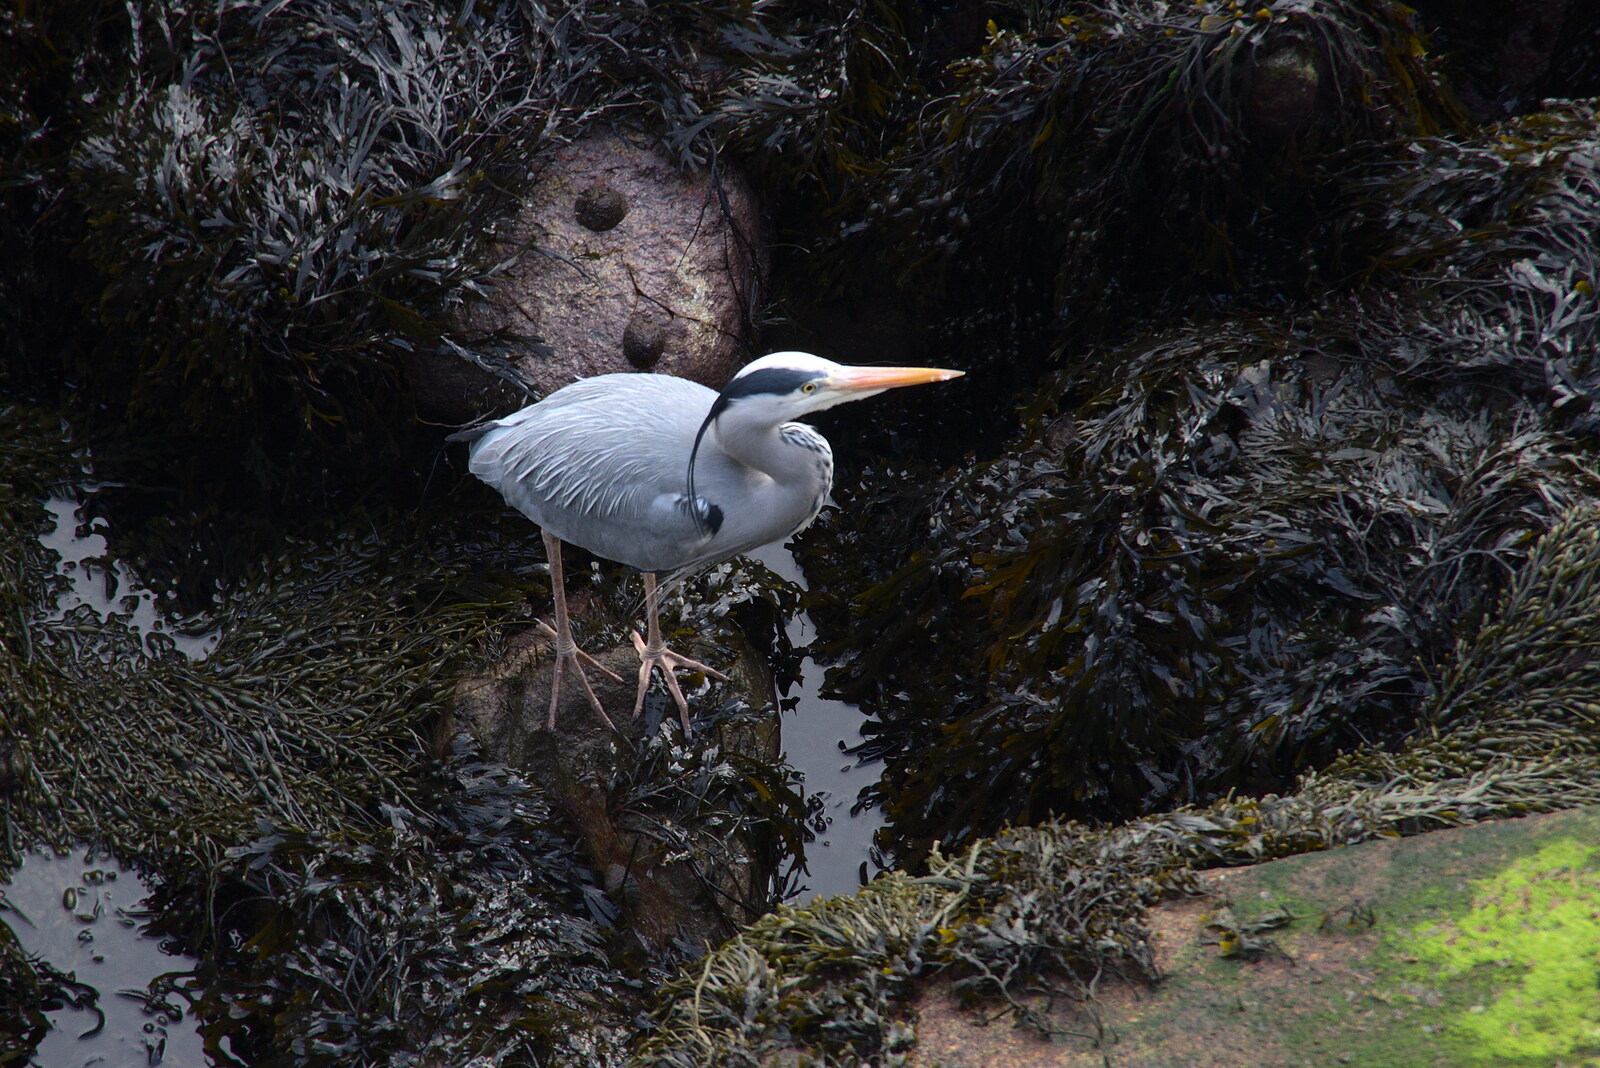 The End of the Breffni, Blackrock, Dublin - 18th February 2023: There's a heron in the rocks